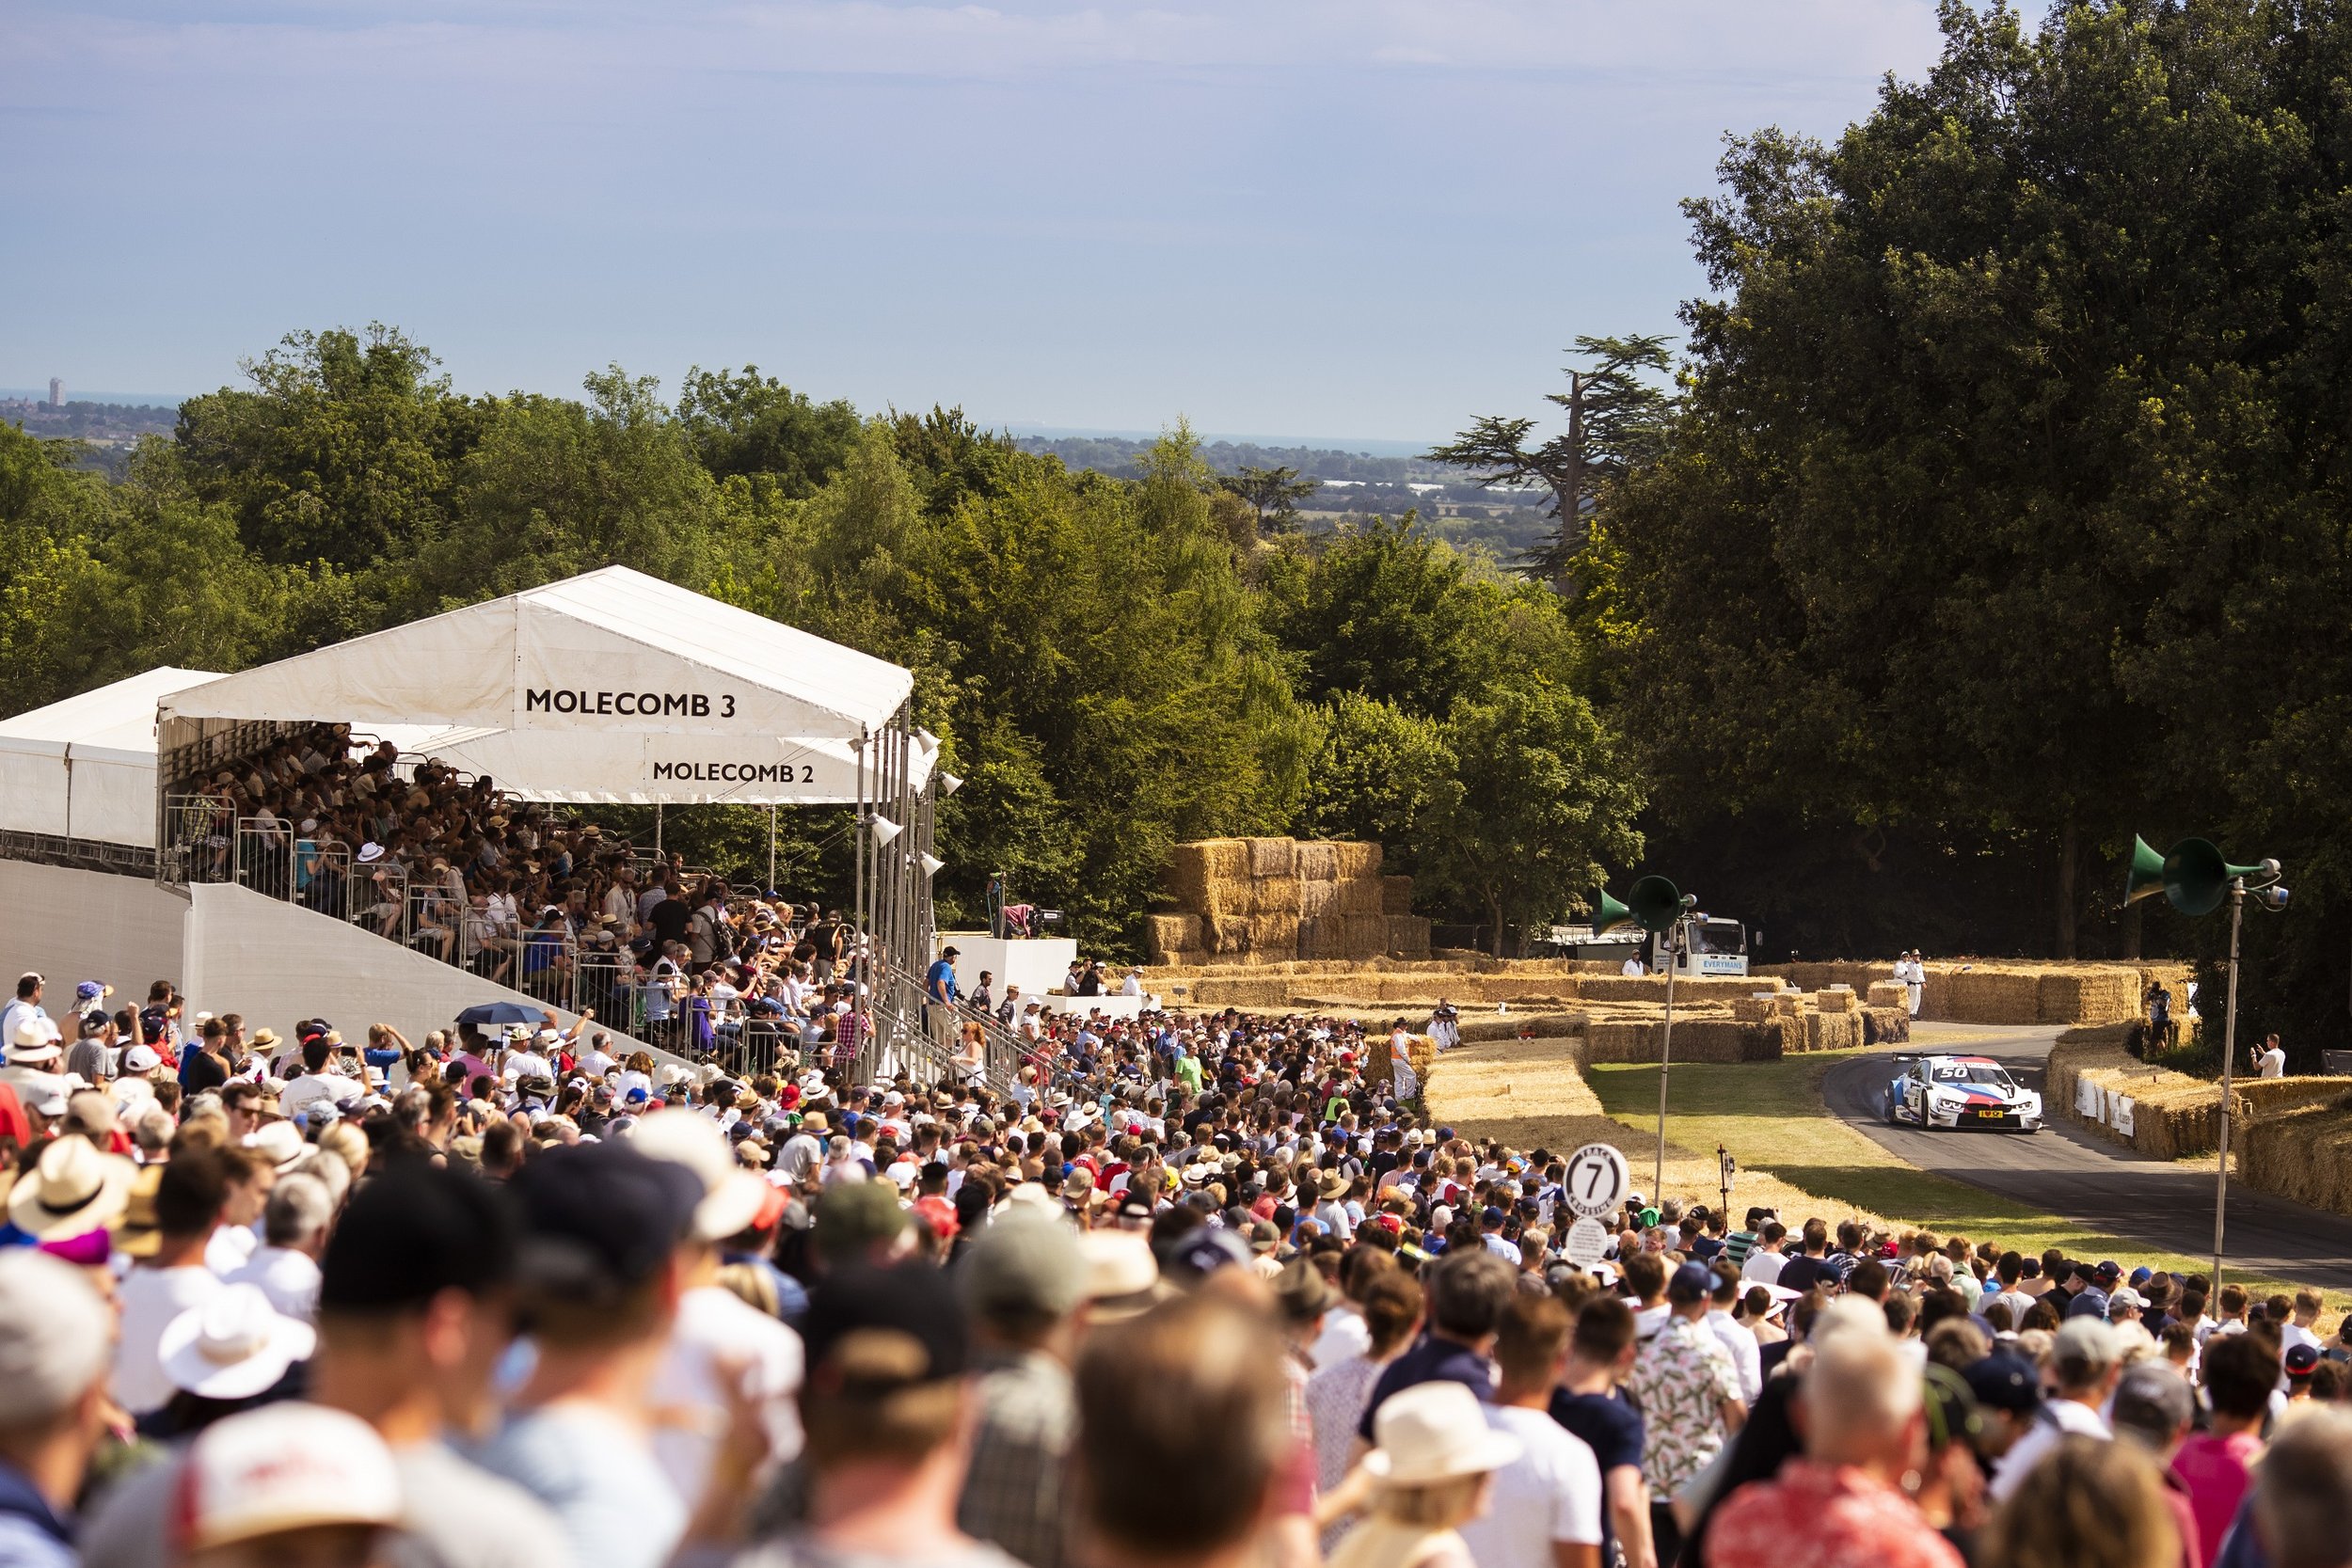  Goodwood Festival of Speed
4th -7th July 2019
Goodwood, England.
Photo: Drew Gibson 